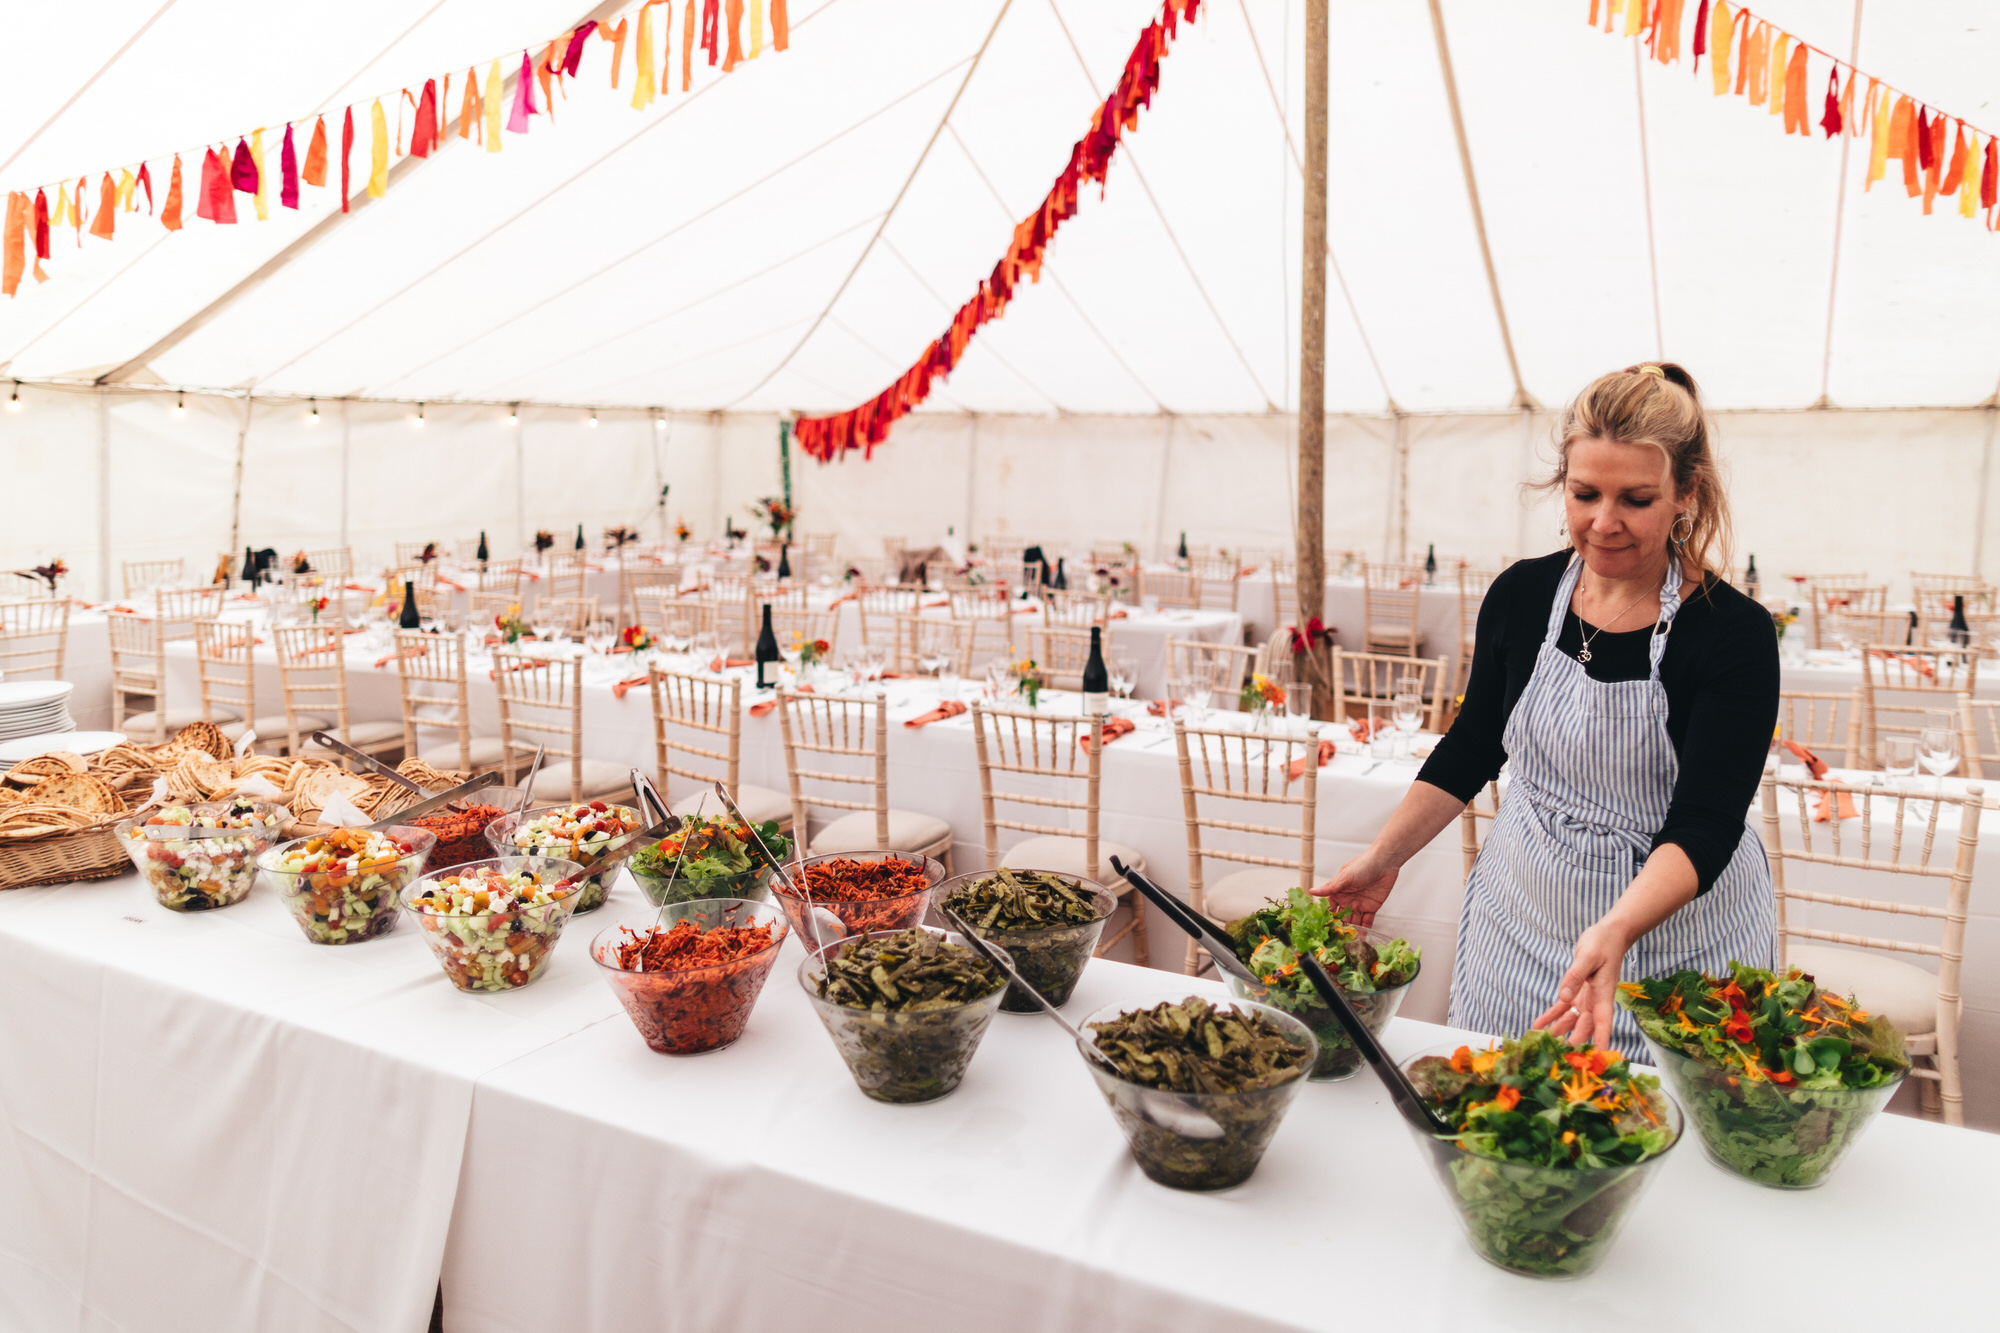 caterer in apron laying table with salads for wedding breakfast in marquee